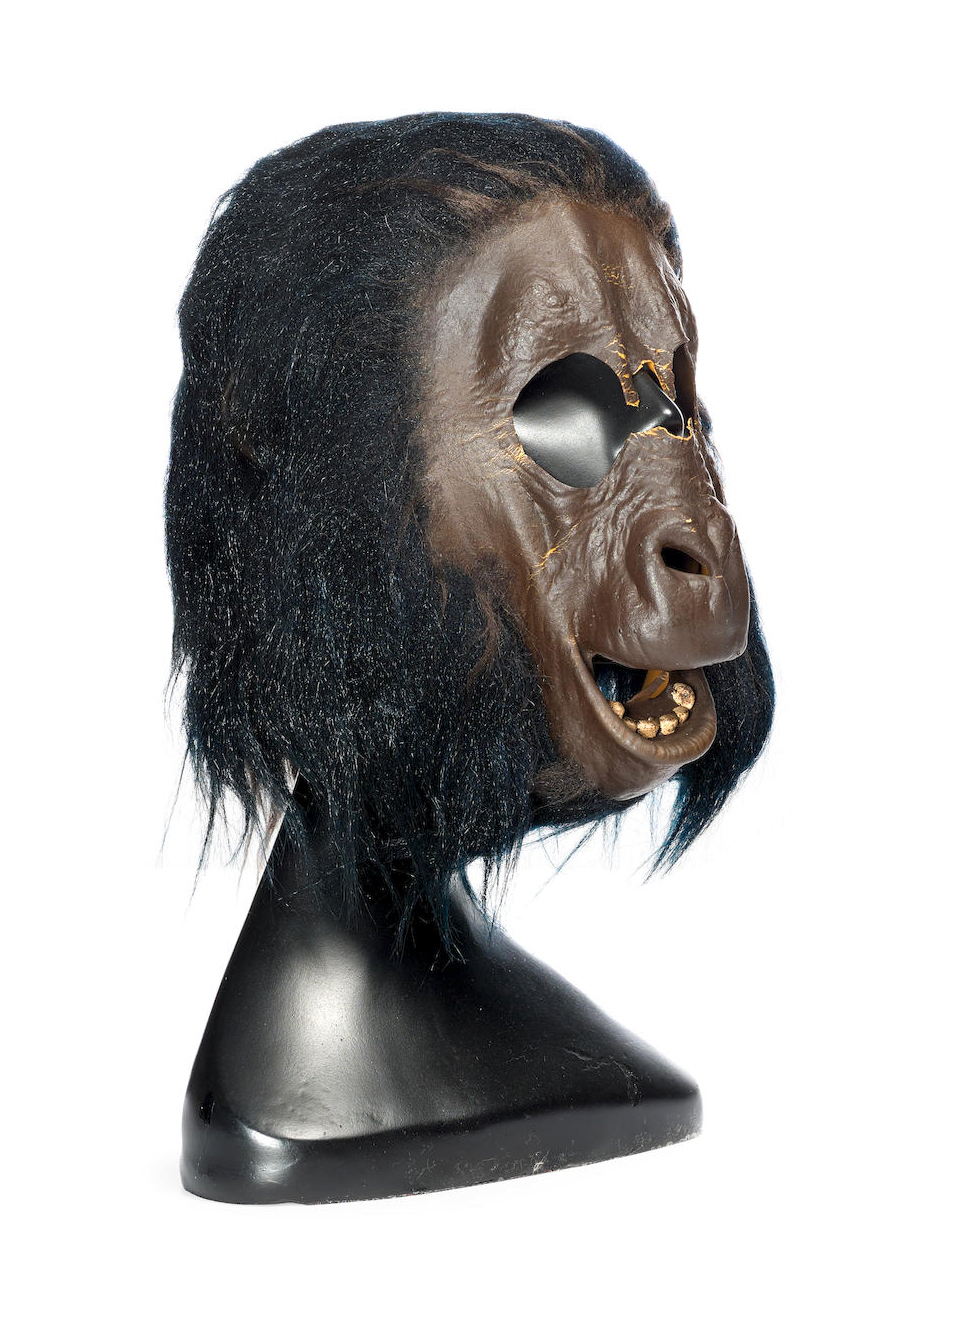 [Planet of the Apes] [John Chambers, 20th Century-Fox]: Screen-used Background Actor Ape Mask, 1968